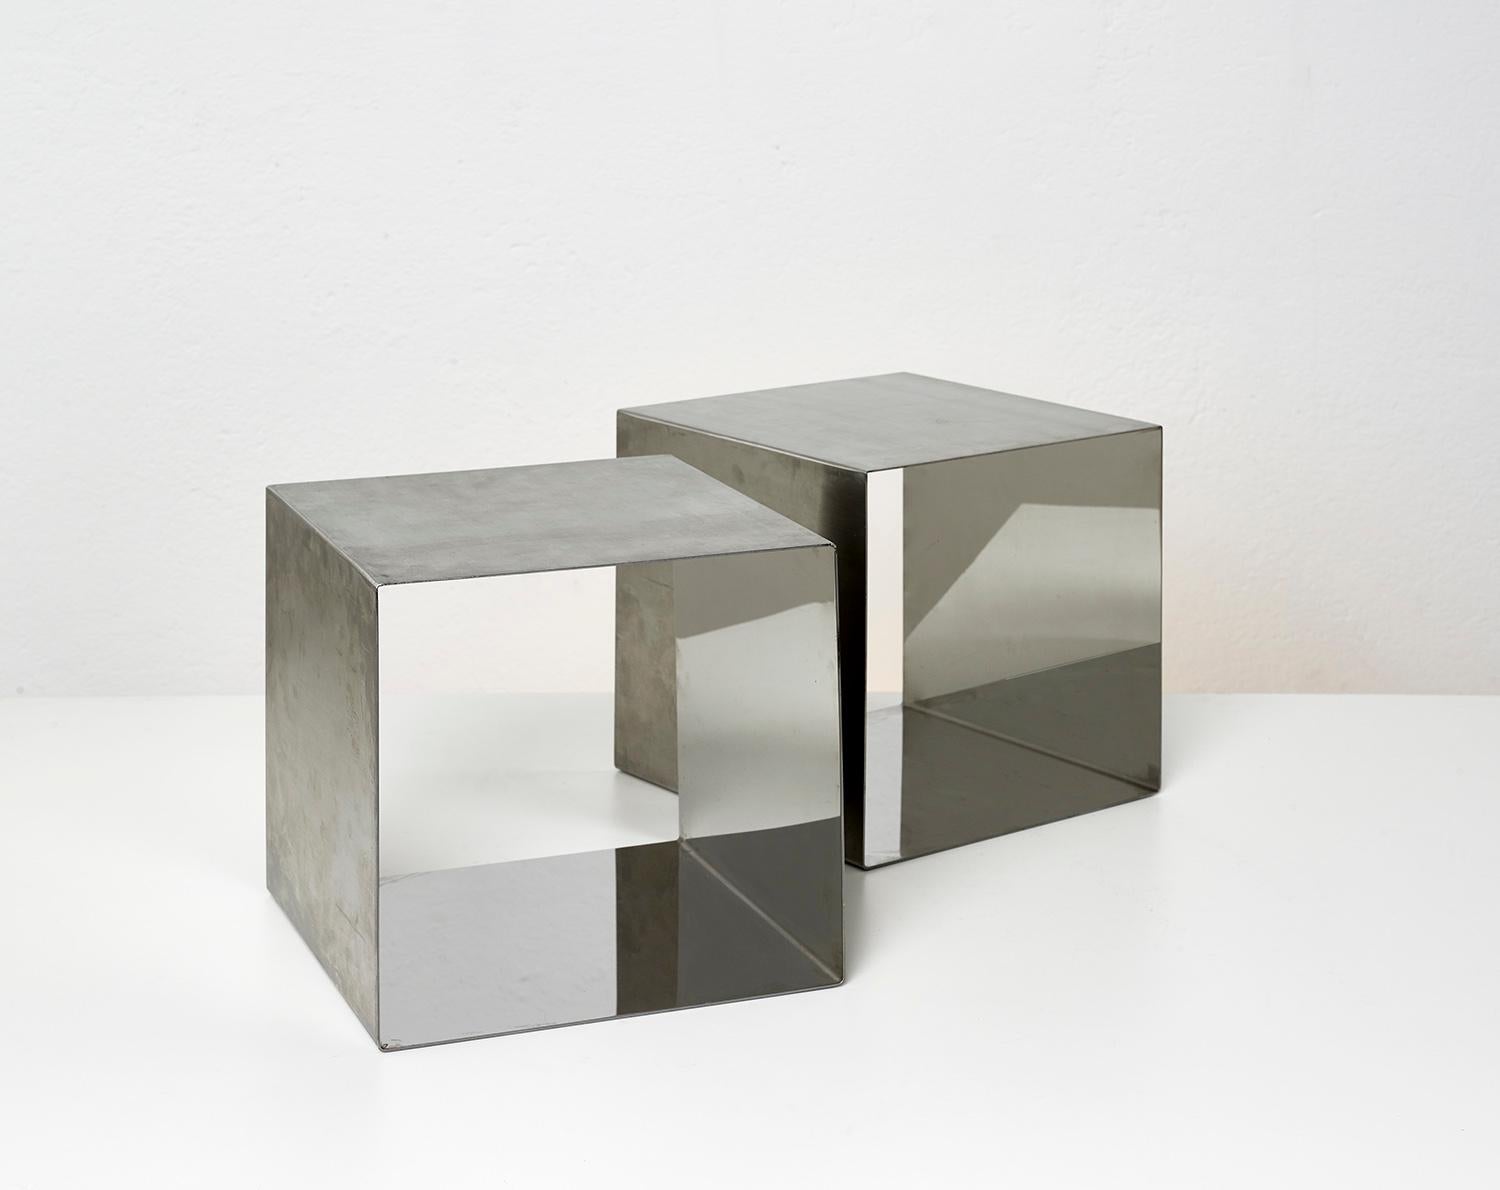 Modern Pair of Stainless Steel Cube Tables by Maria Pergay for Design Steel France 1968